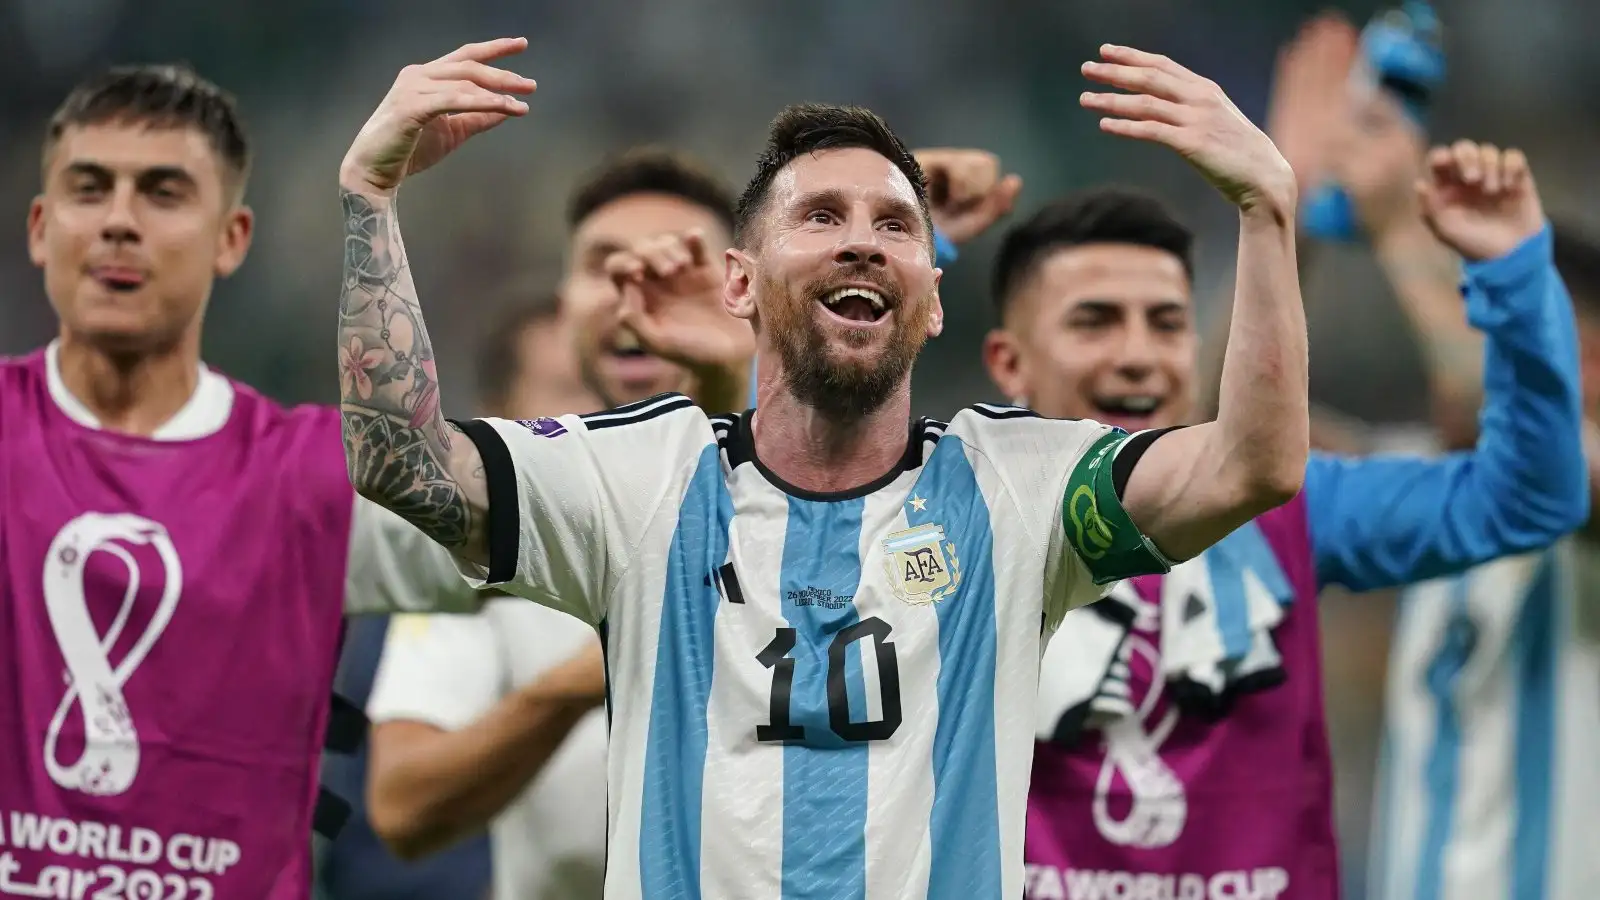 Boxer Alvarez threatens Messi over World Cup jersey 'insult' - Sports -  Business Recorder